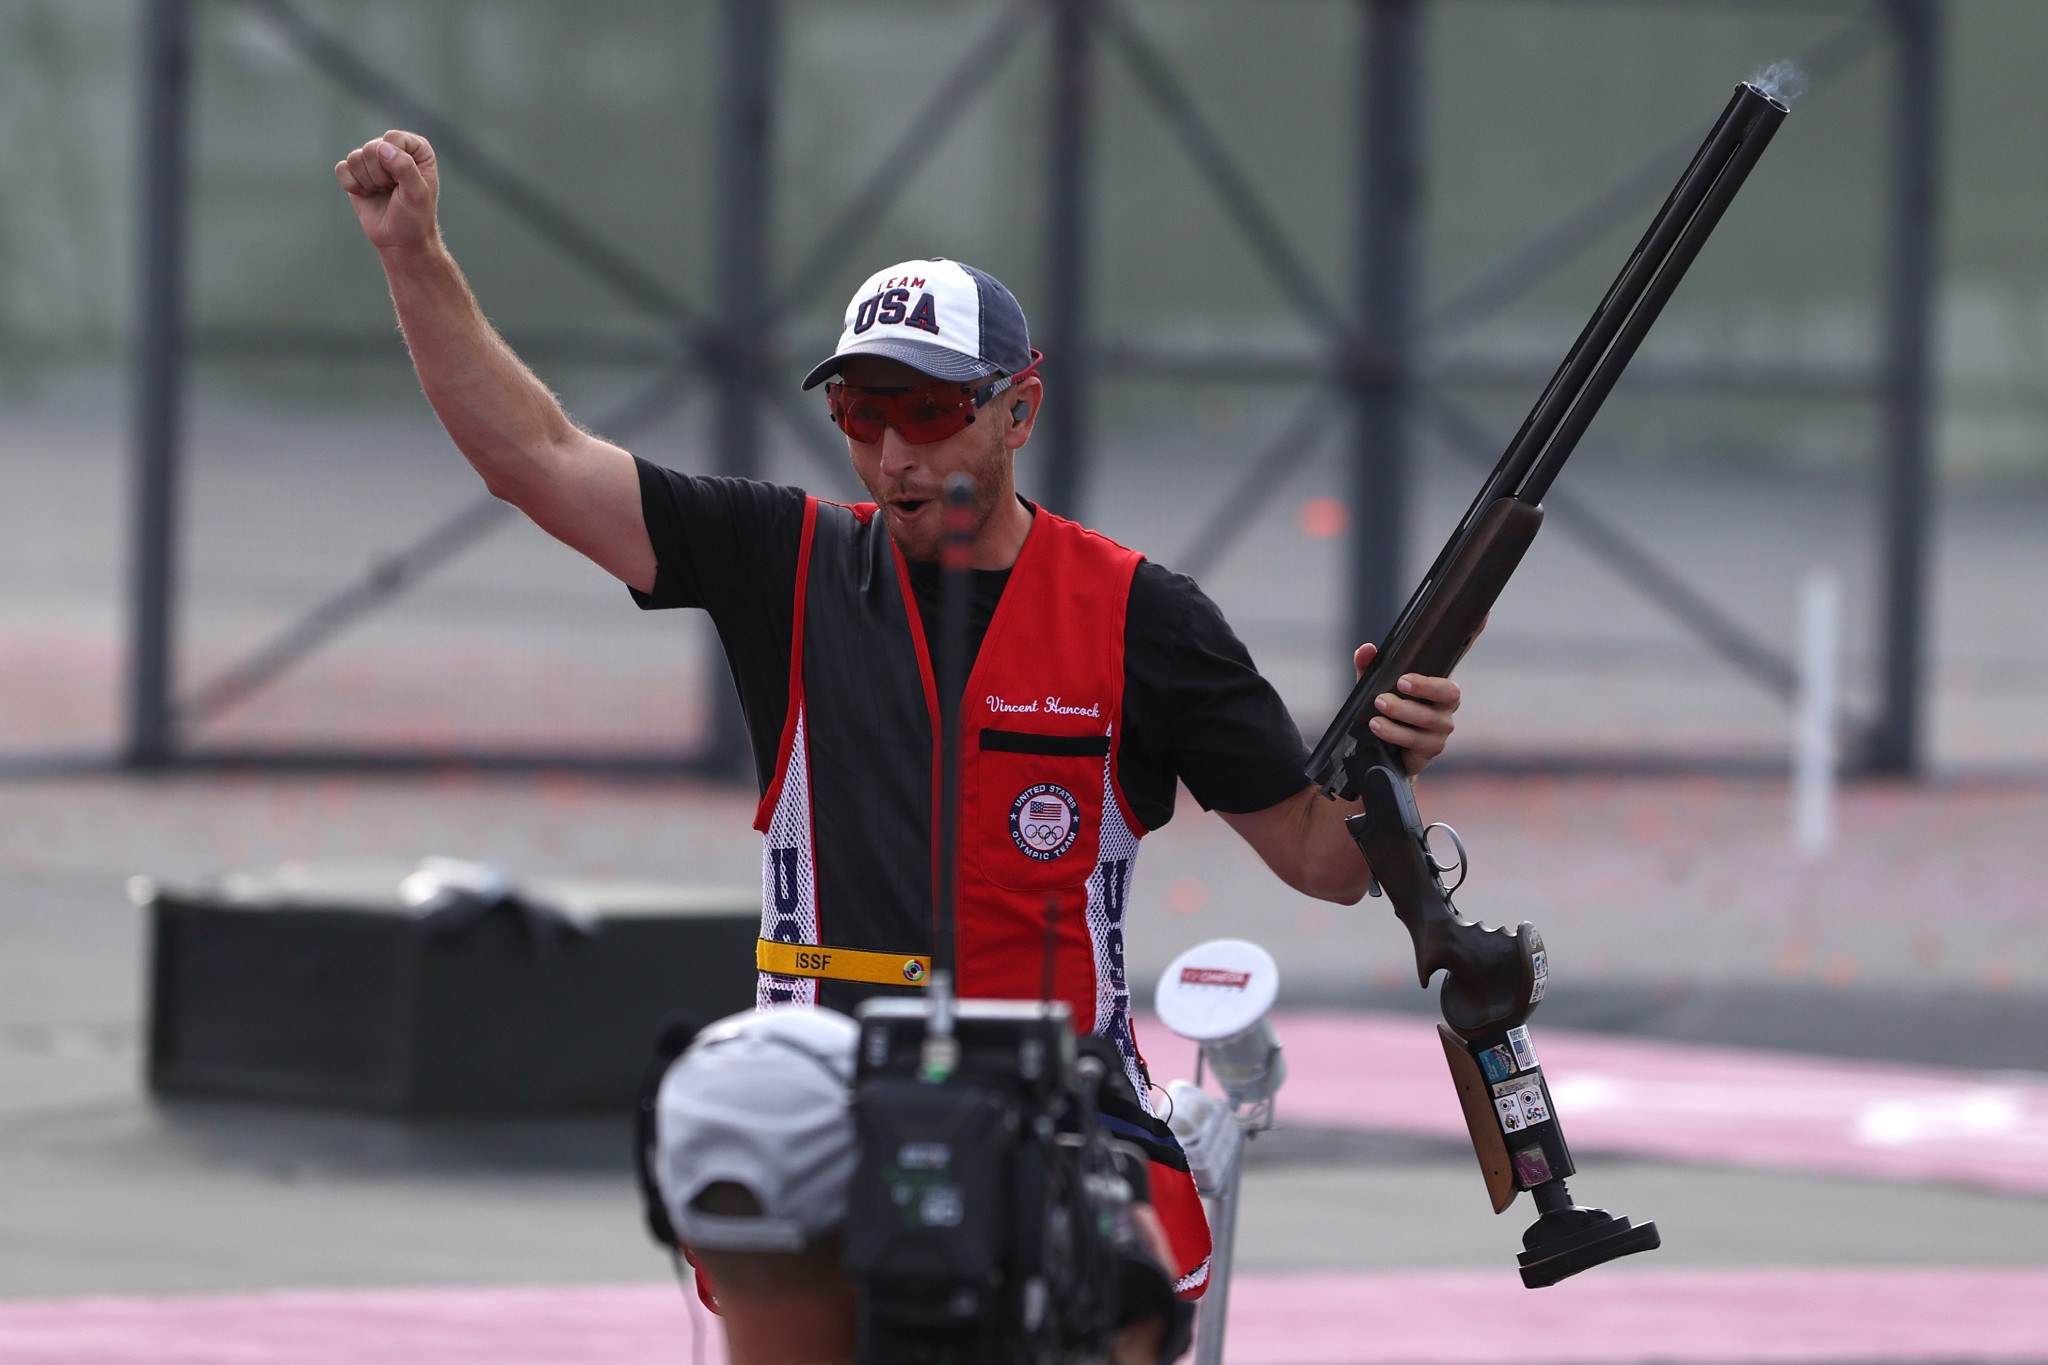 The United States' Vincent Hancock, a three-time Olympic champion, was victorious in the men's skeet in Baku ©Getty Images